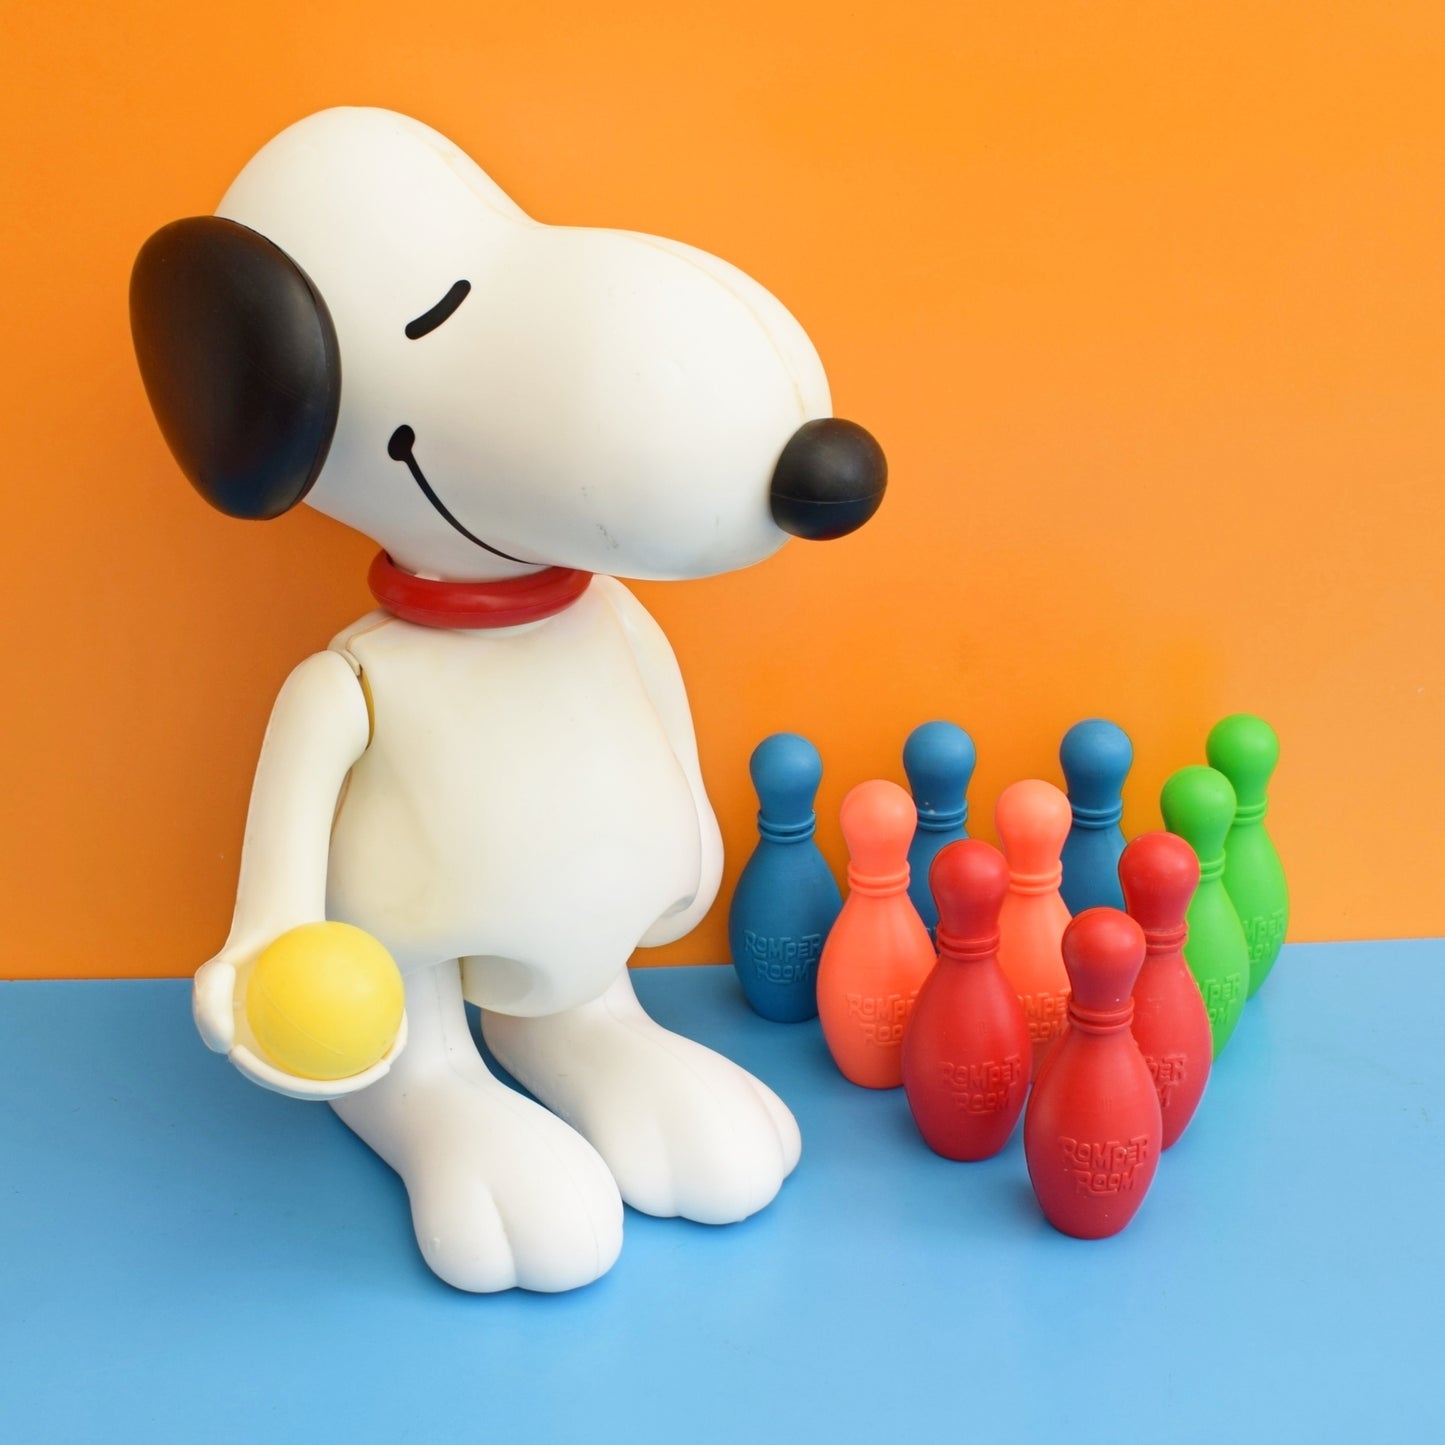 Vintage 1970s Giant Bowling Snoopy With skittles / Ball